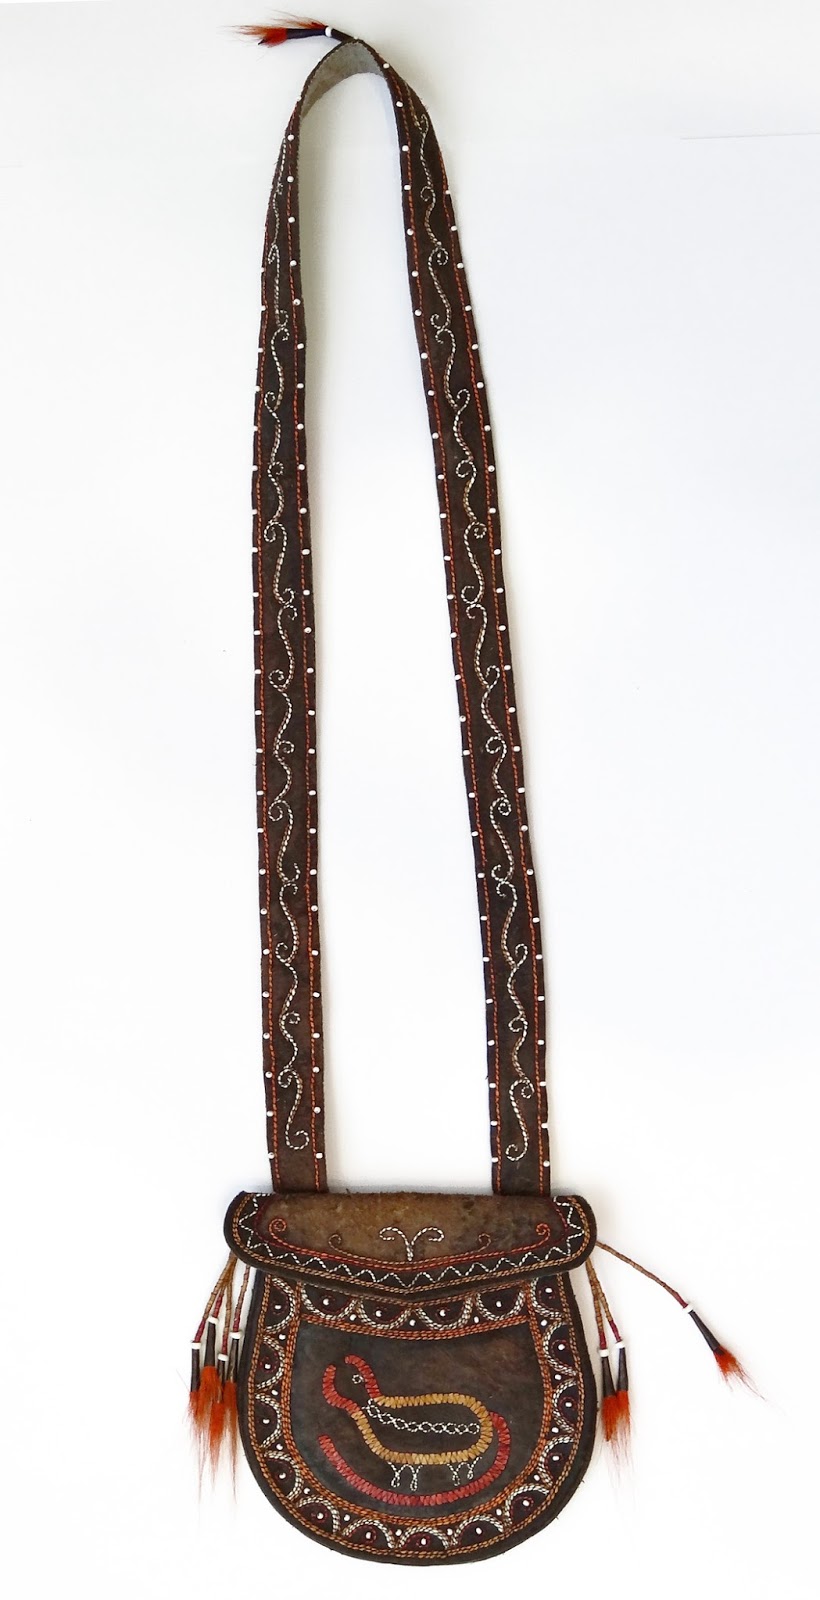 Contemporary Makers: Quillwork Bag by Bill Wright